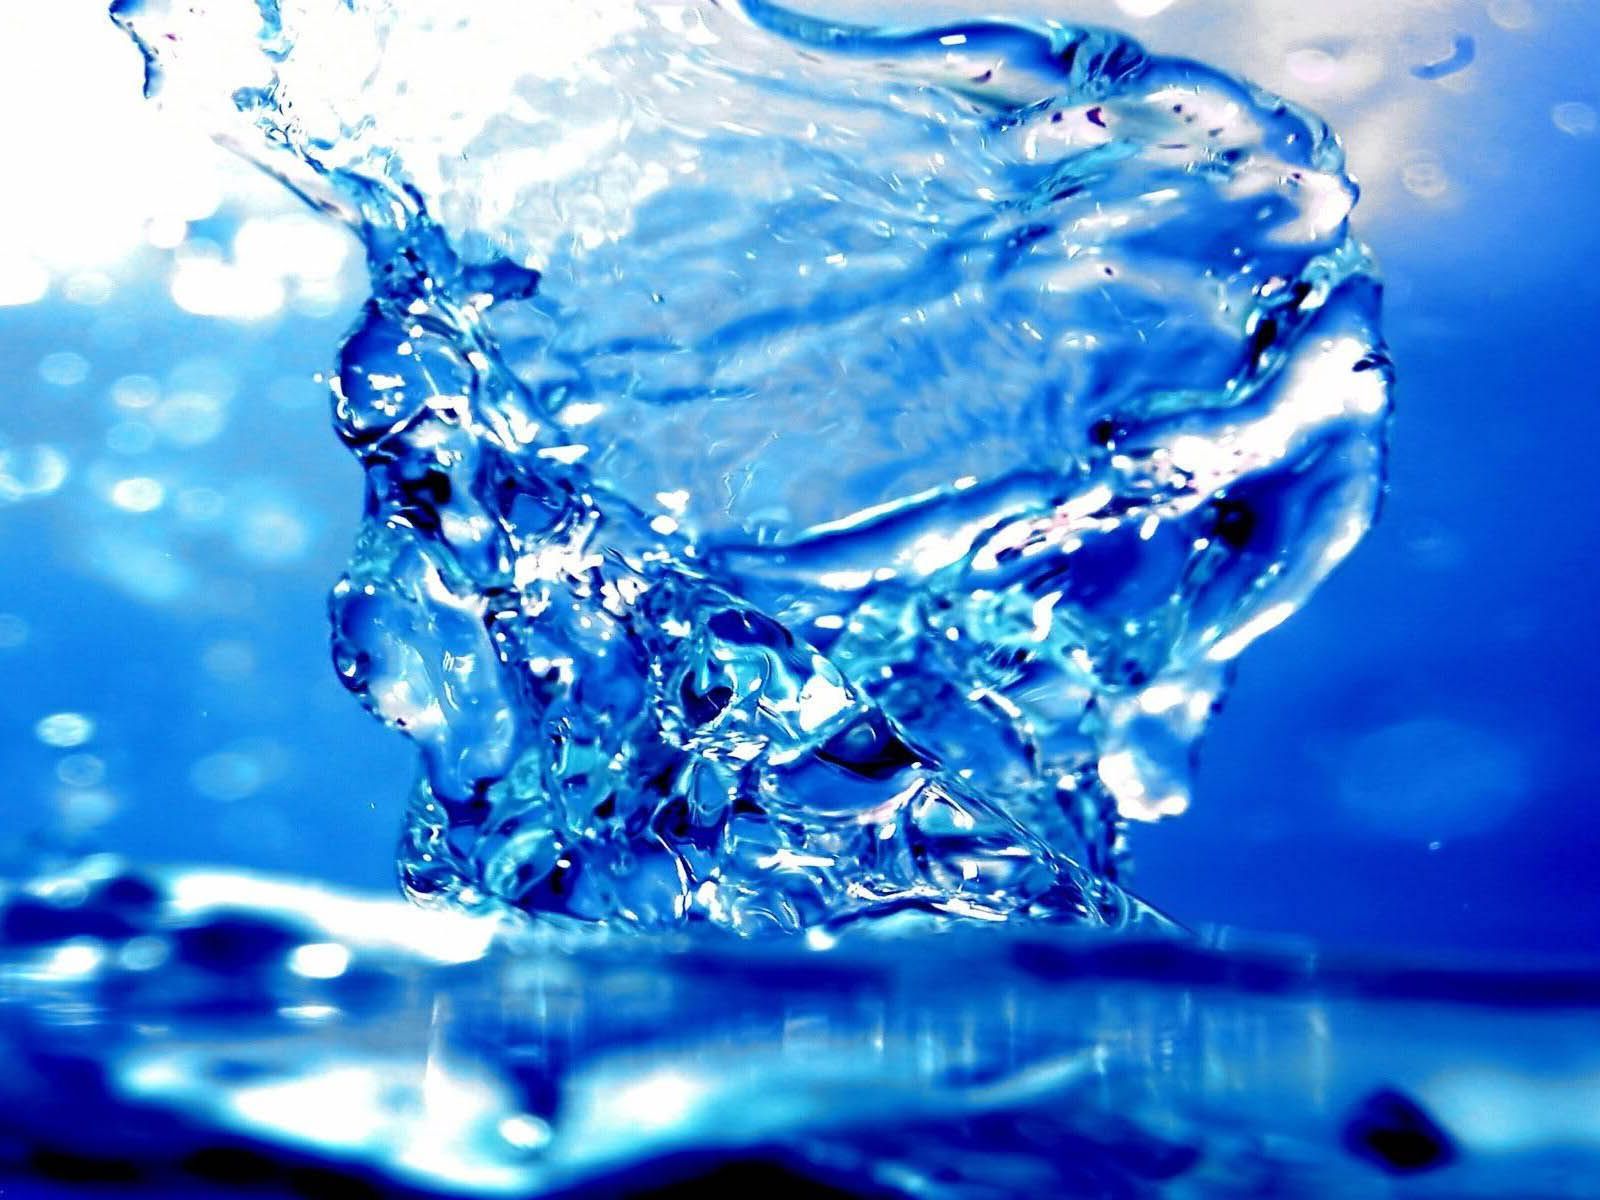 Water Moving Animation GIFs | Tenor